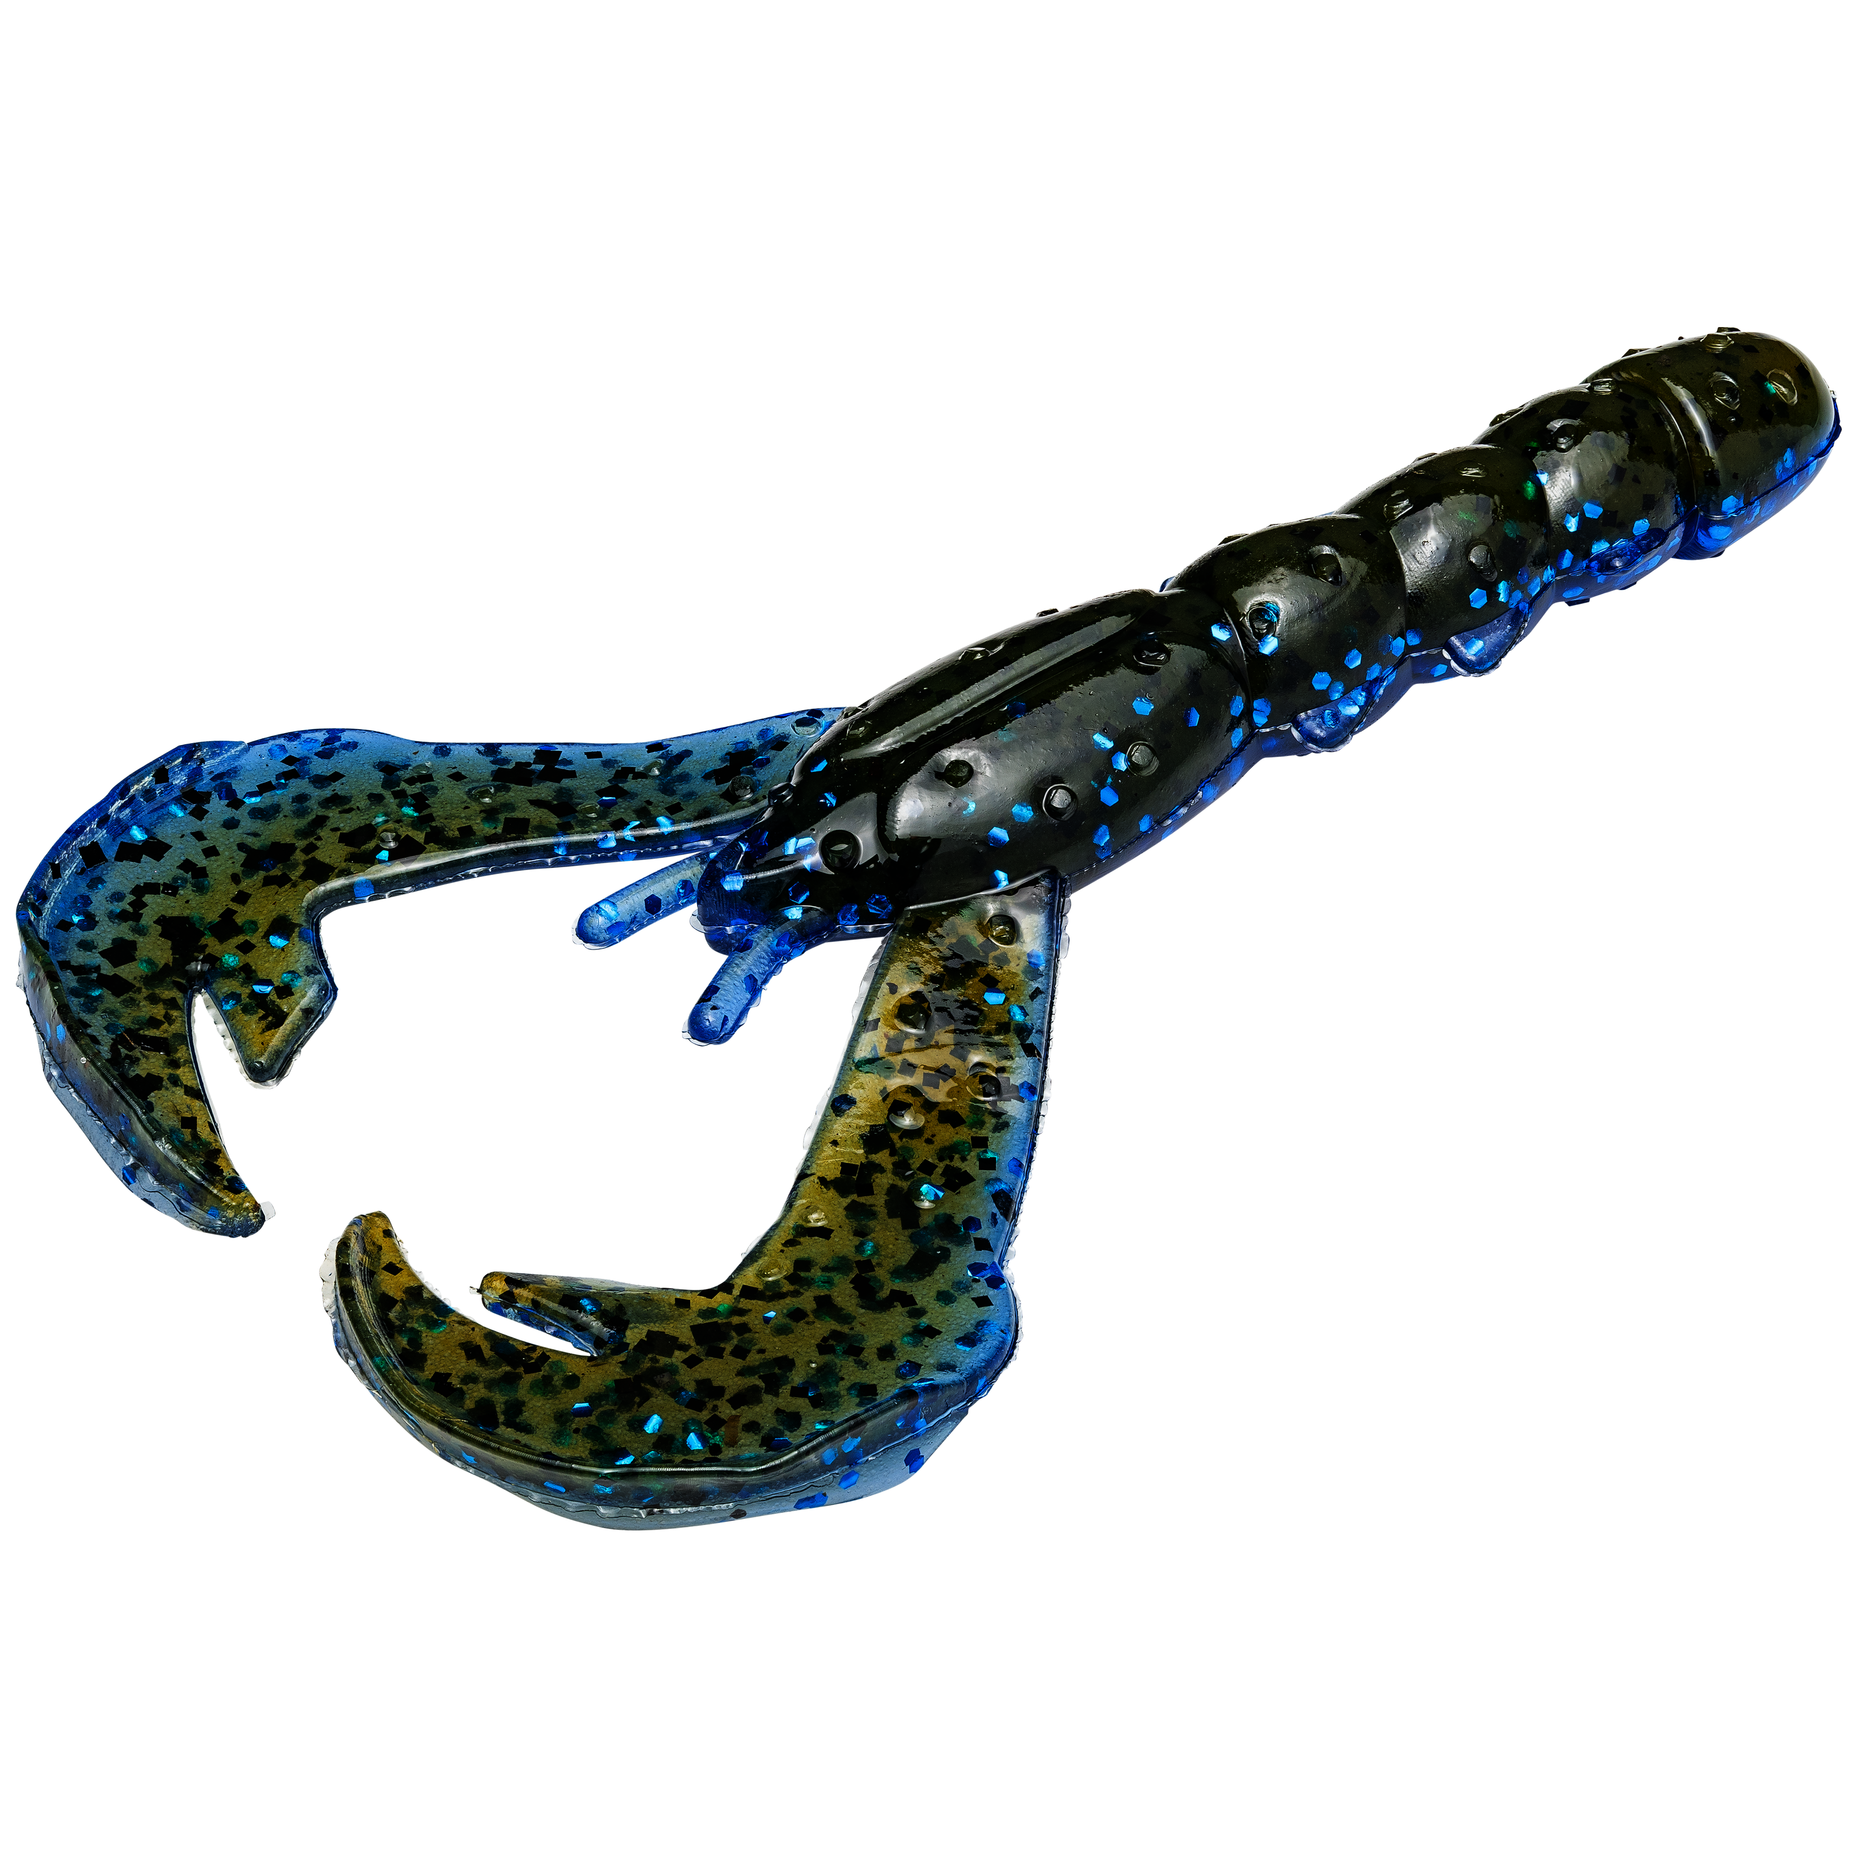 What Do Y'all Think Of This Lure? : r/Fishing